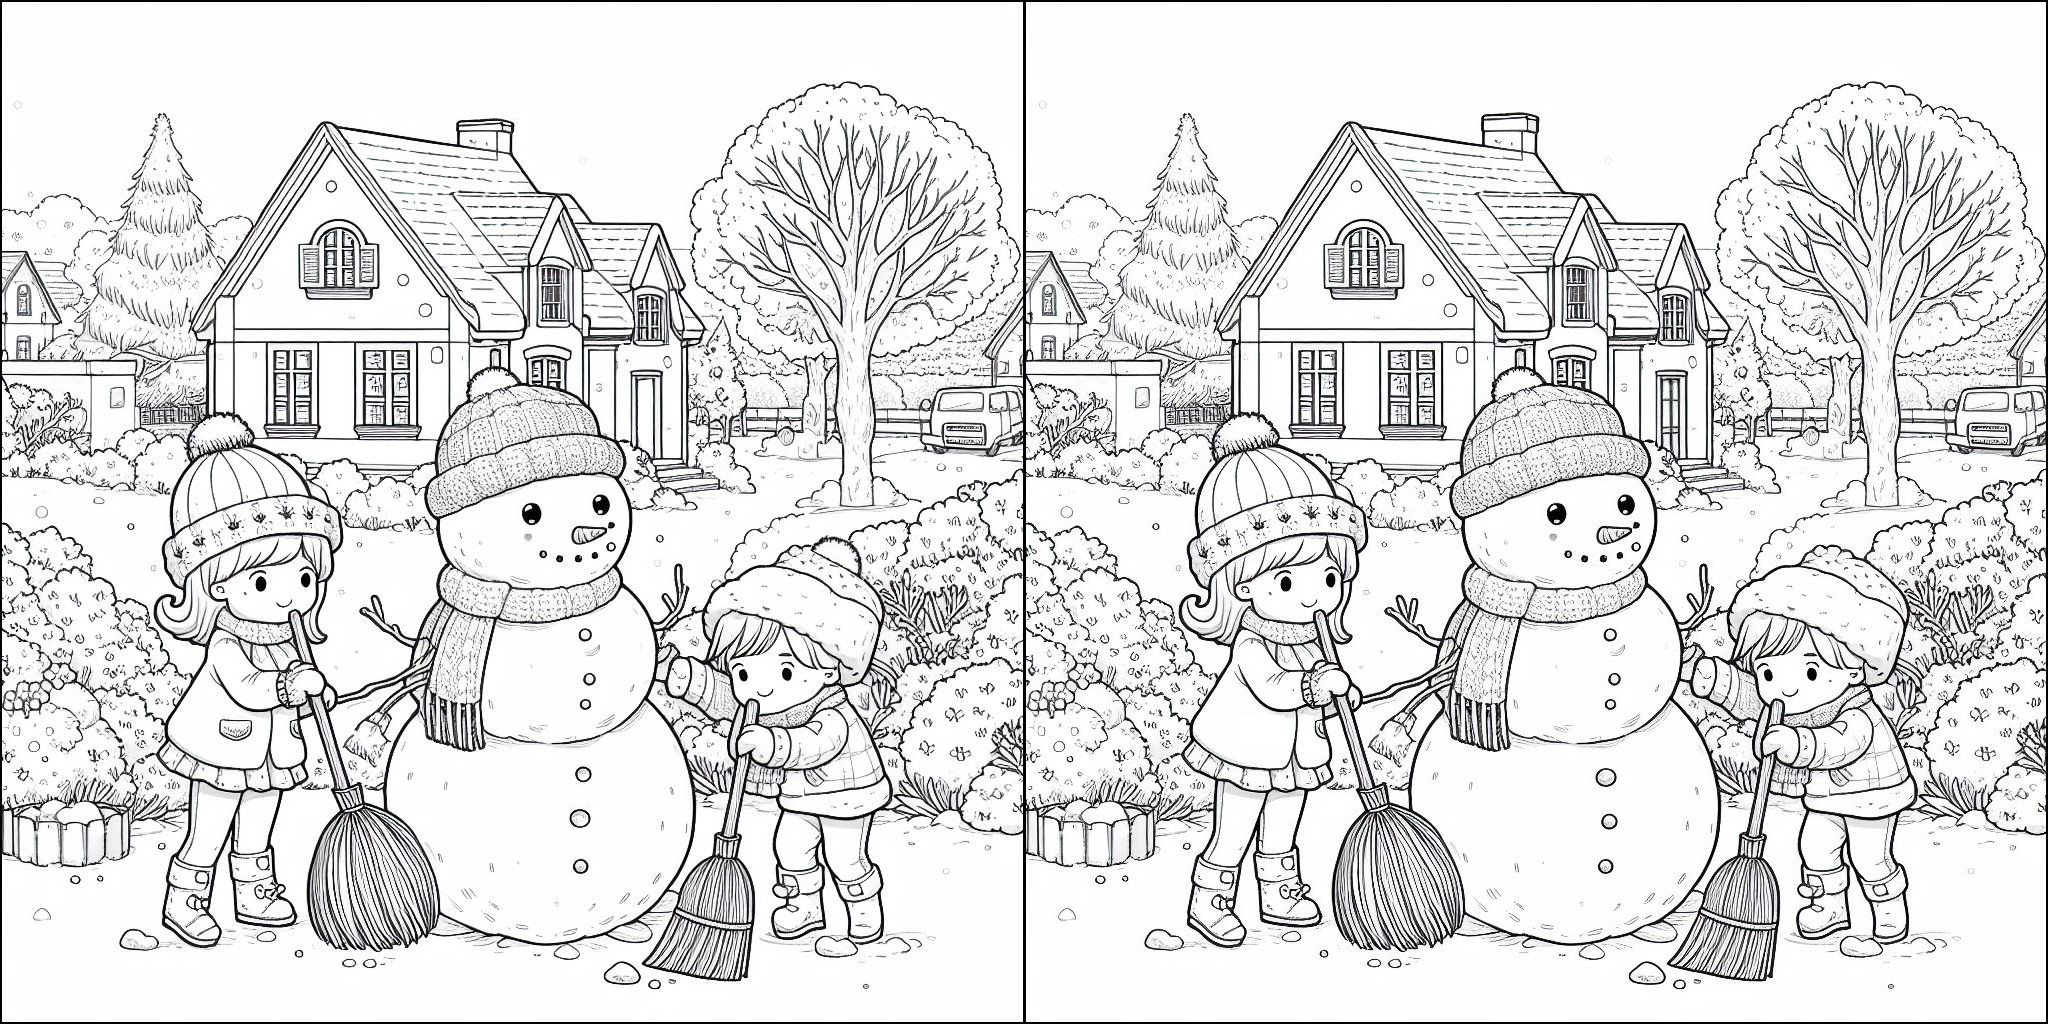 Coloring page Snowman and children